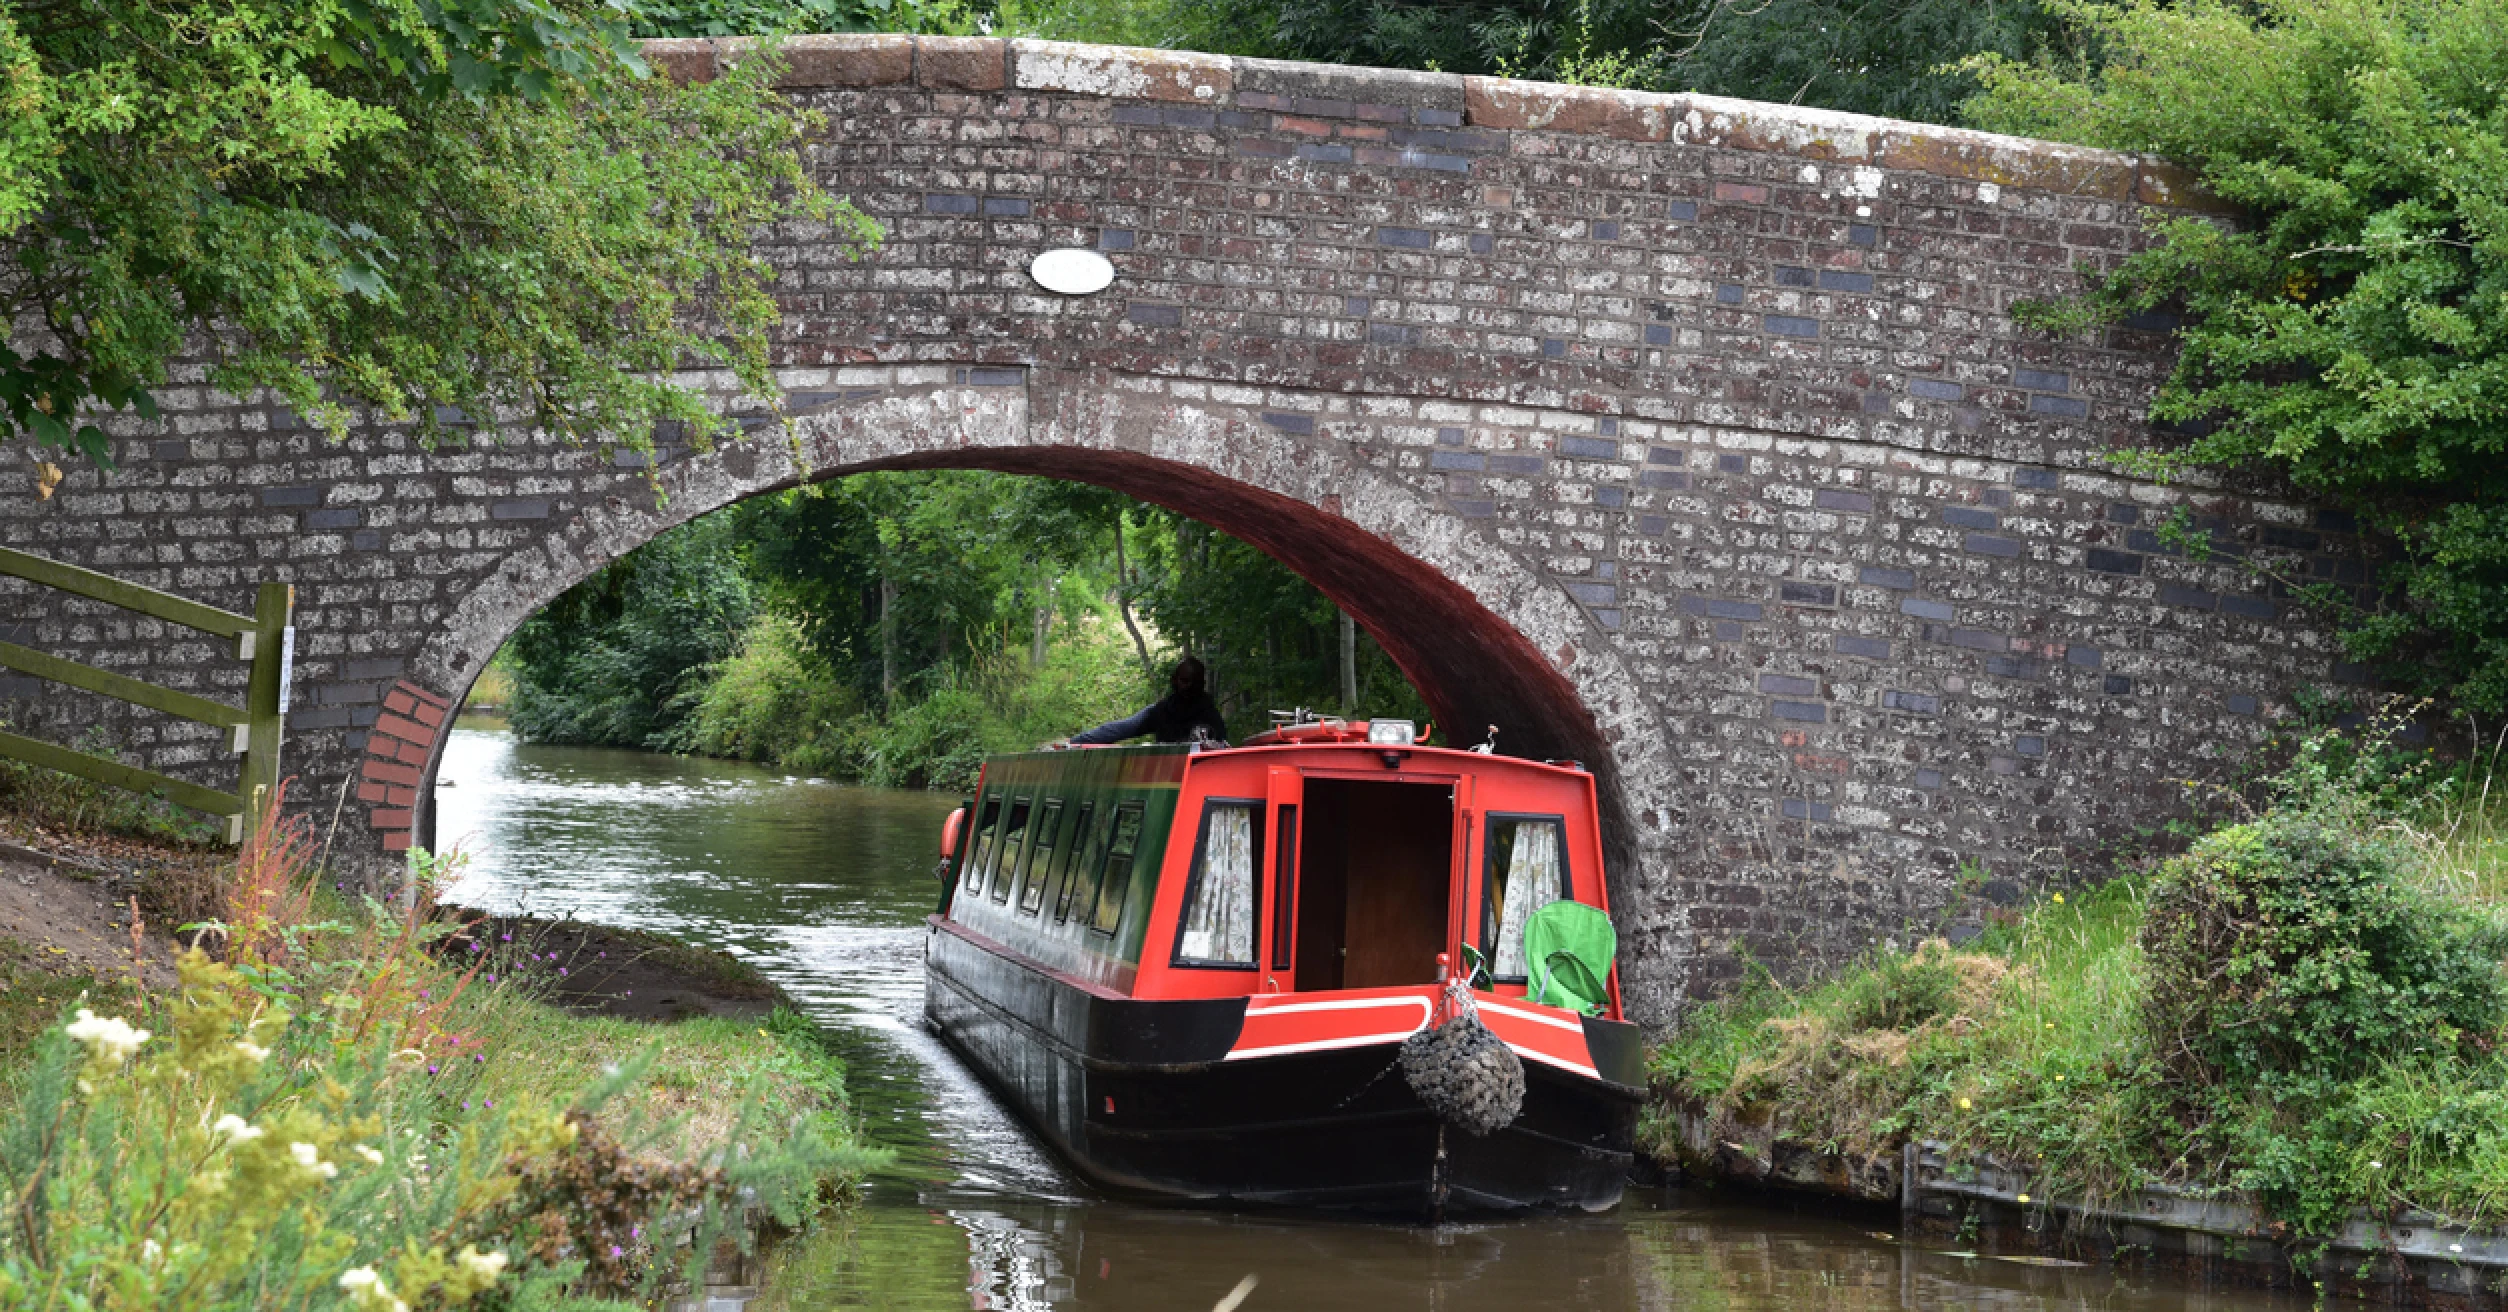 A narrowboat passing though a bridge hole on the Llangollen Canal